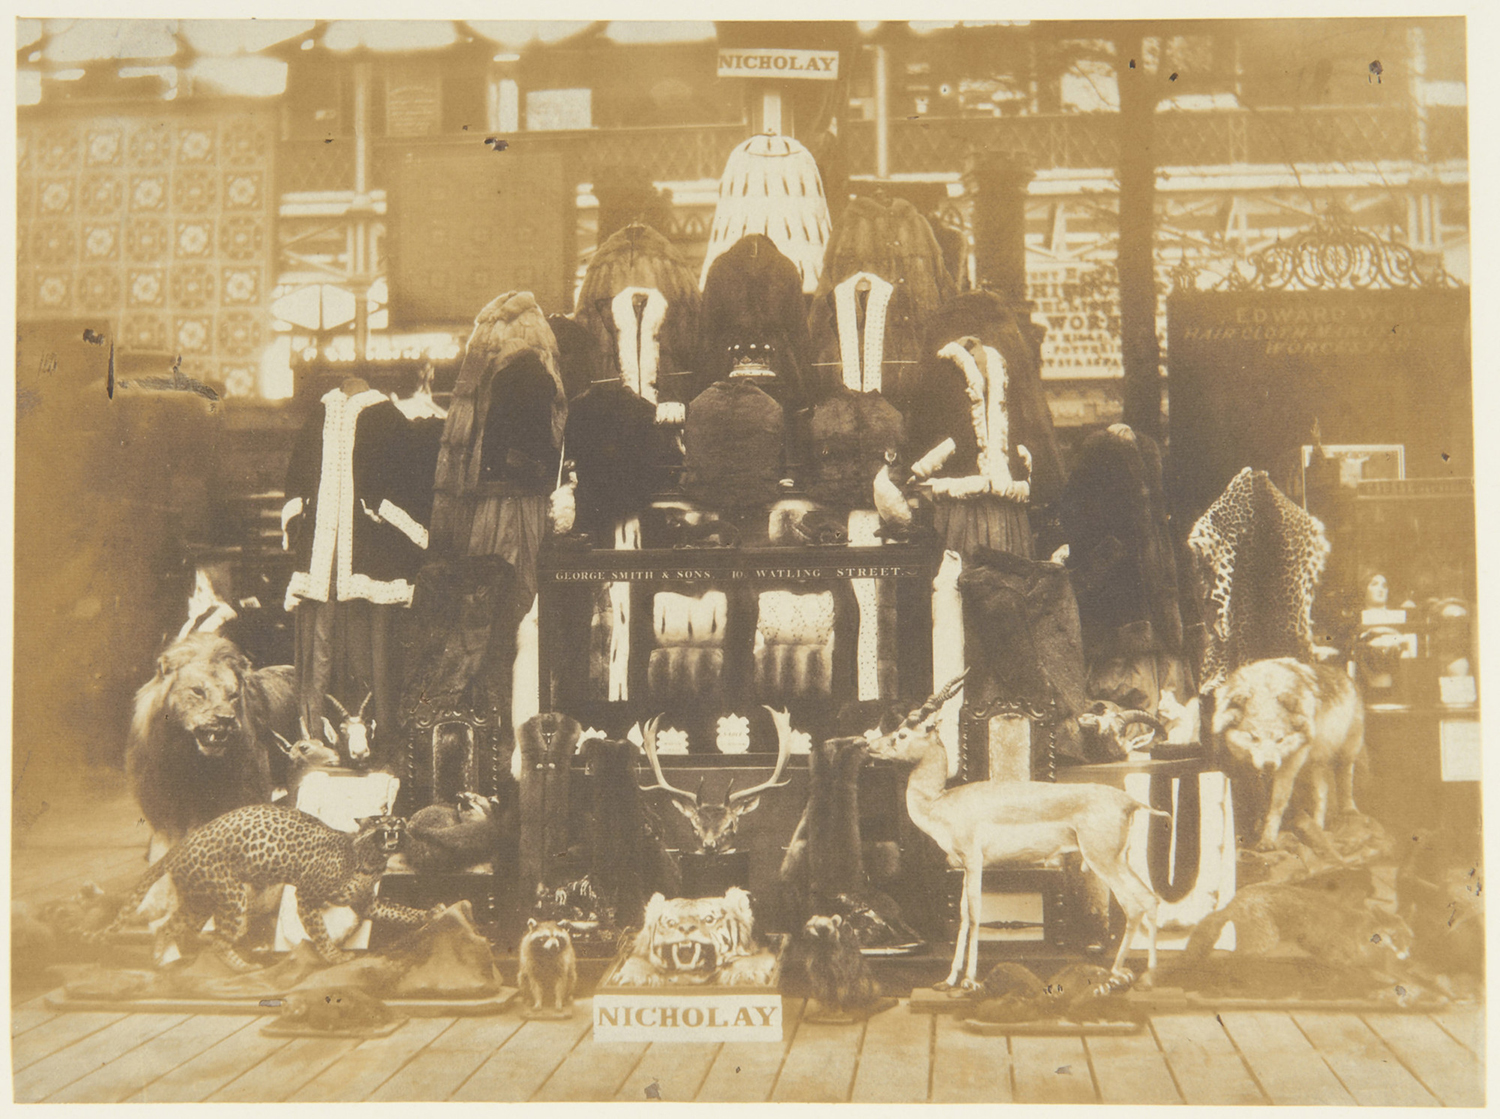 Photograph showing a collection of furs and taxidermy assembled by Nicholay and Son, London and exhibited at the Great Exhibition by Claude-Marie Ferrier, 1851.